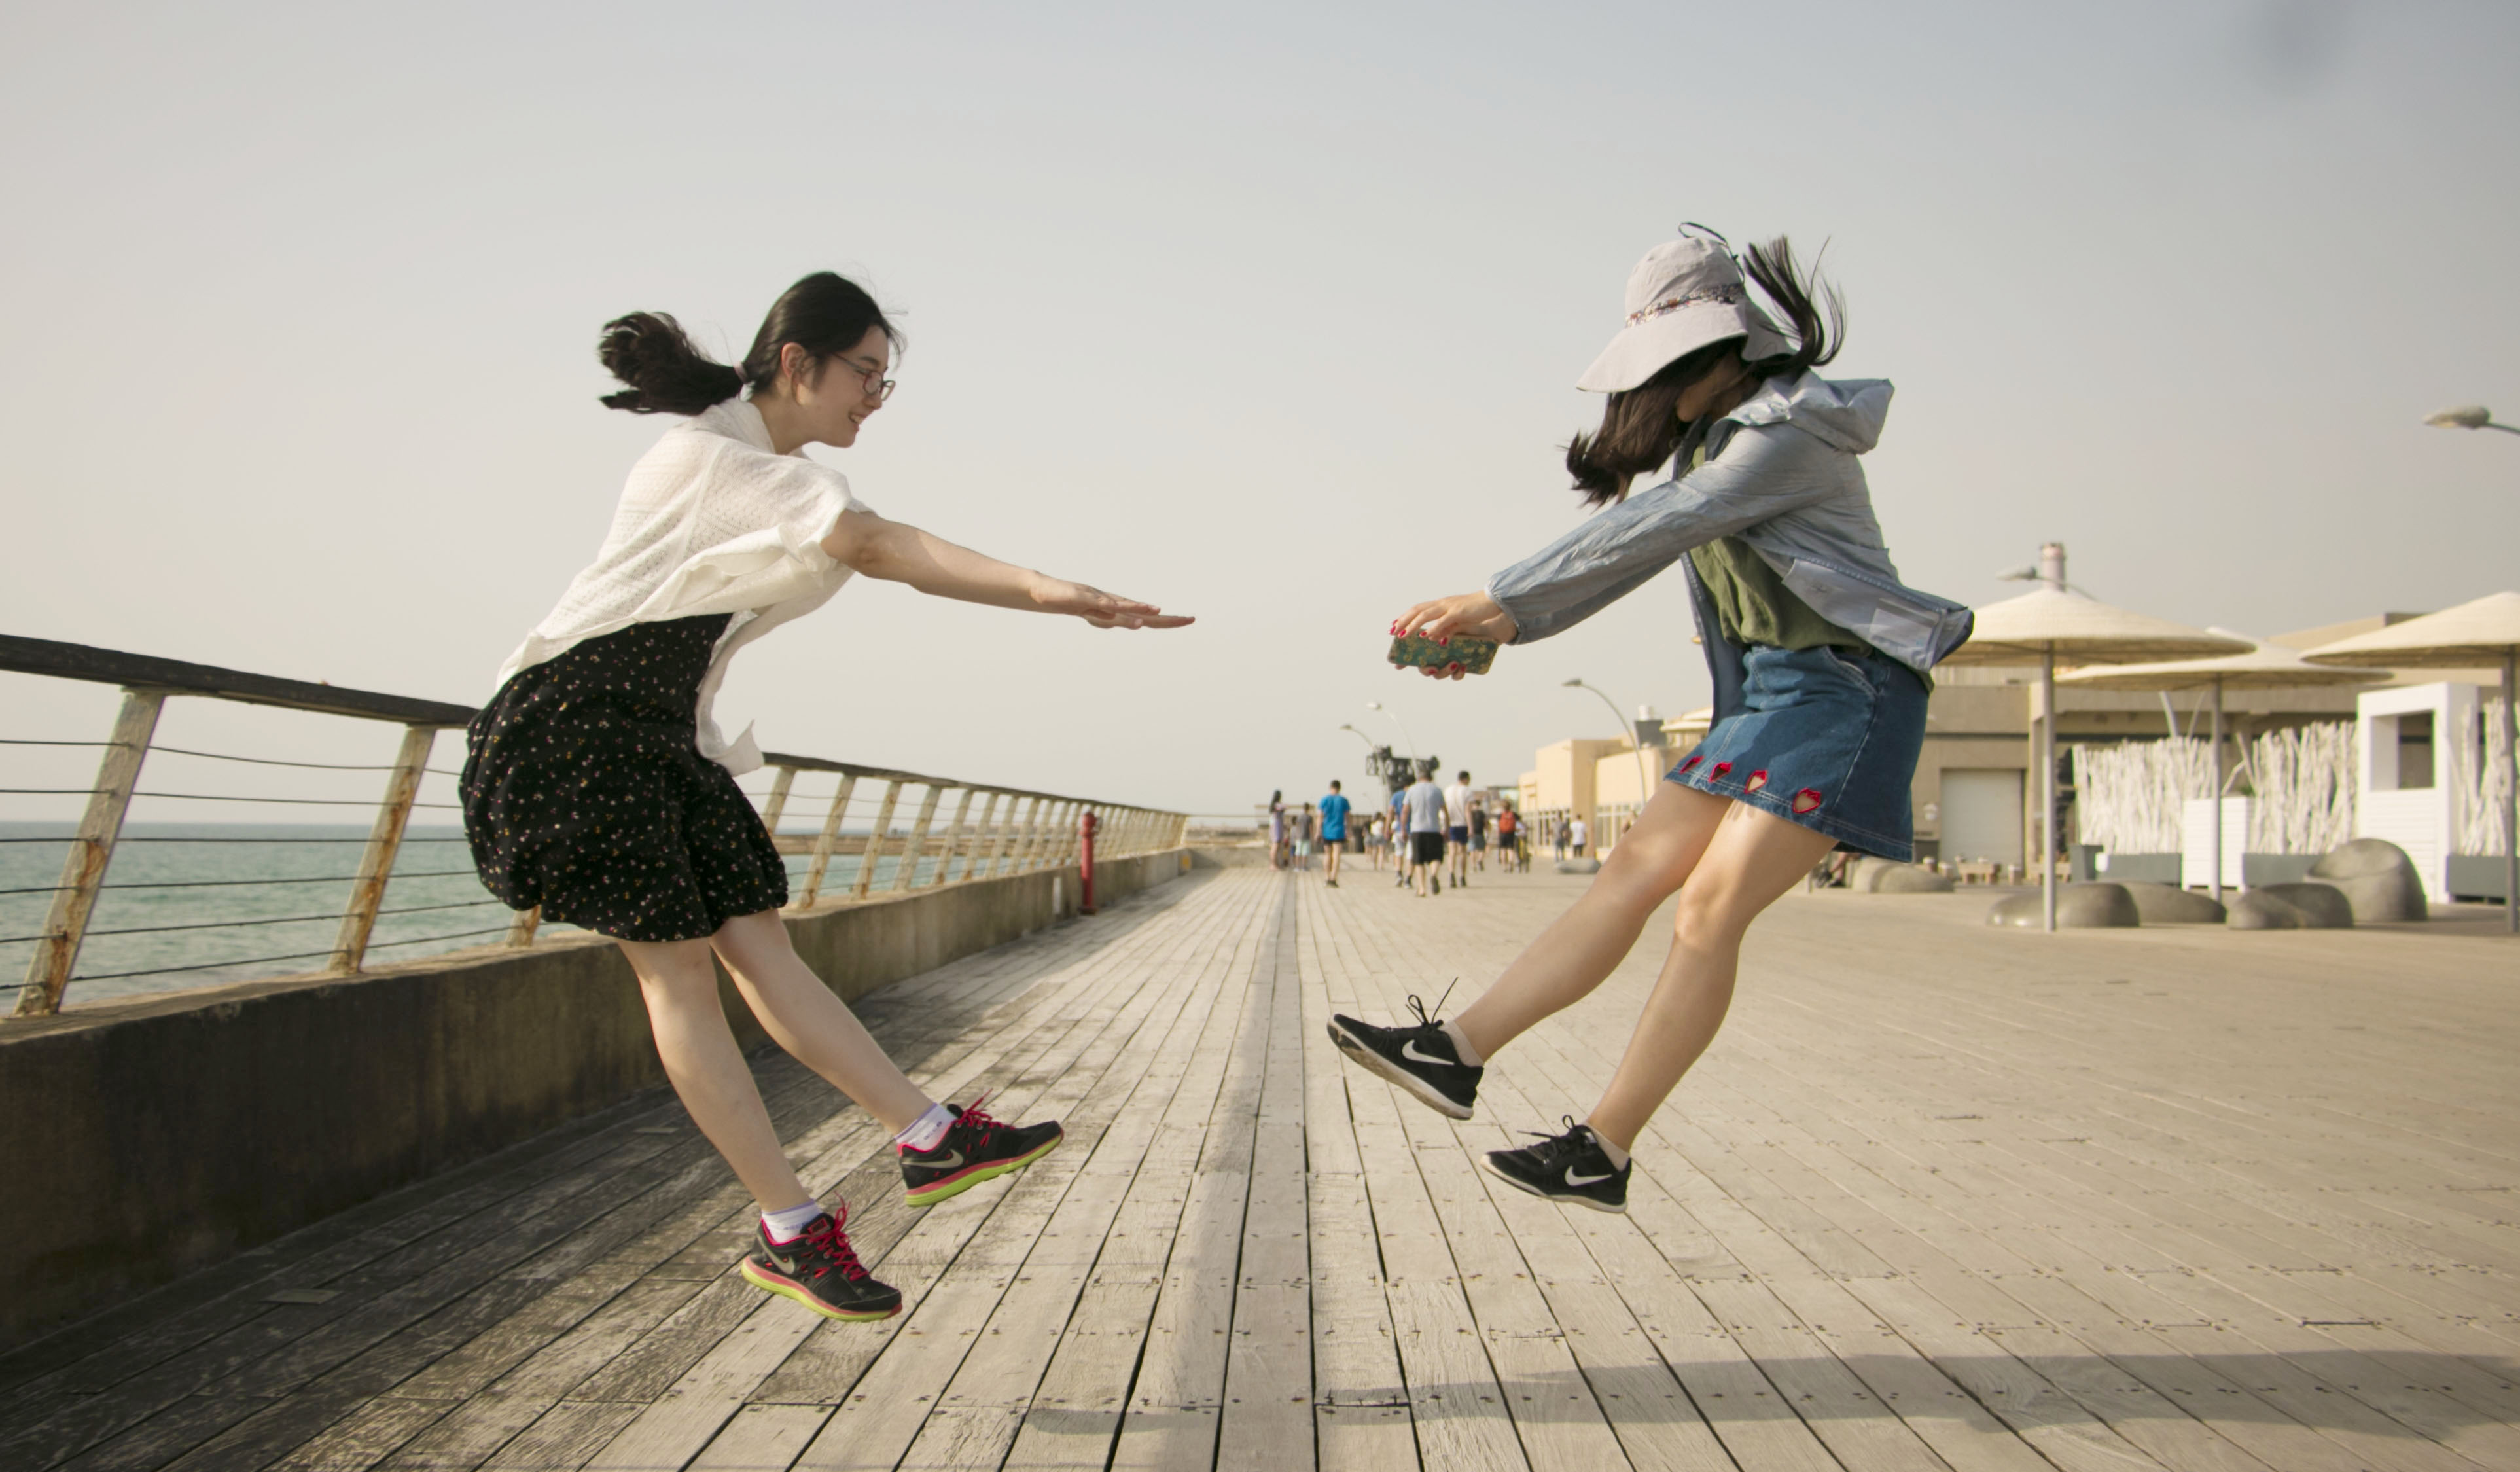 Two students jumping along the boardwalk.